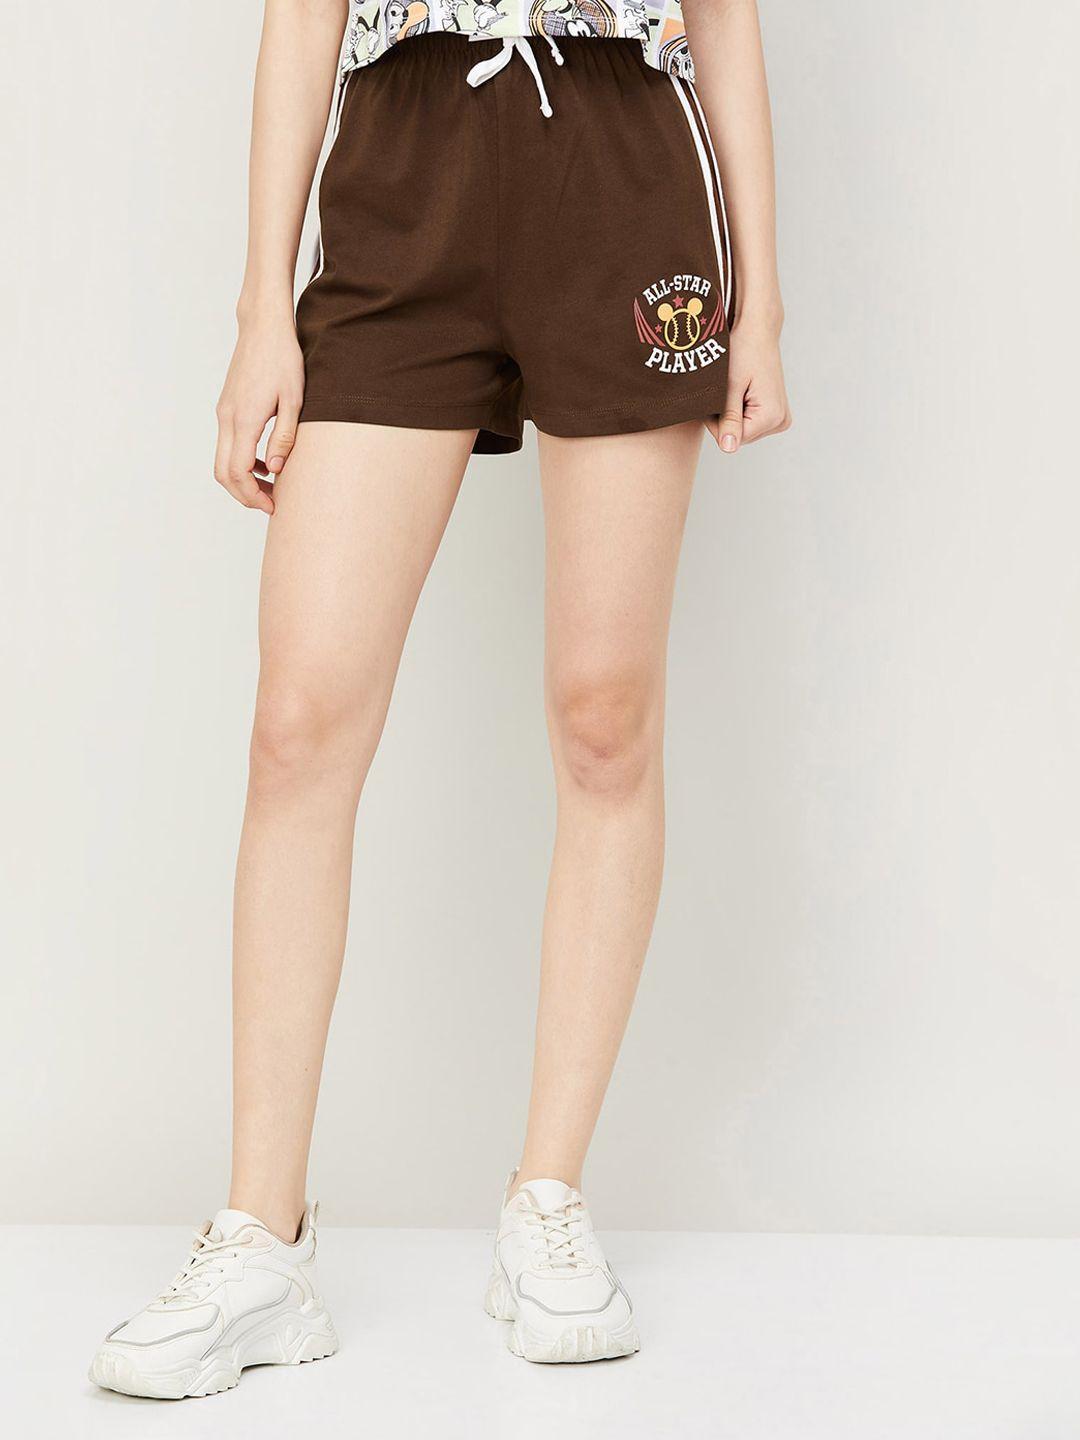 ginger-by-lifestyle-women-printed-pure-cotton-shorts